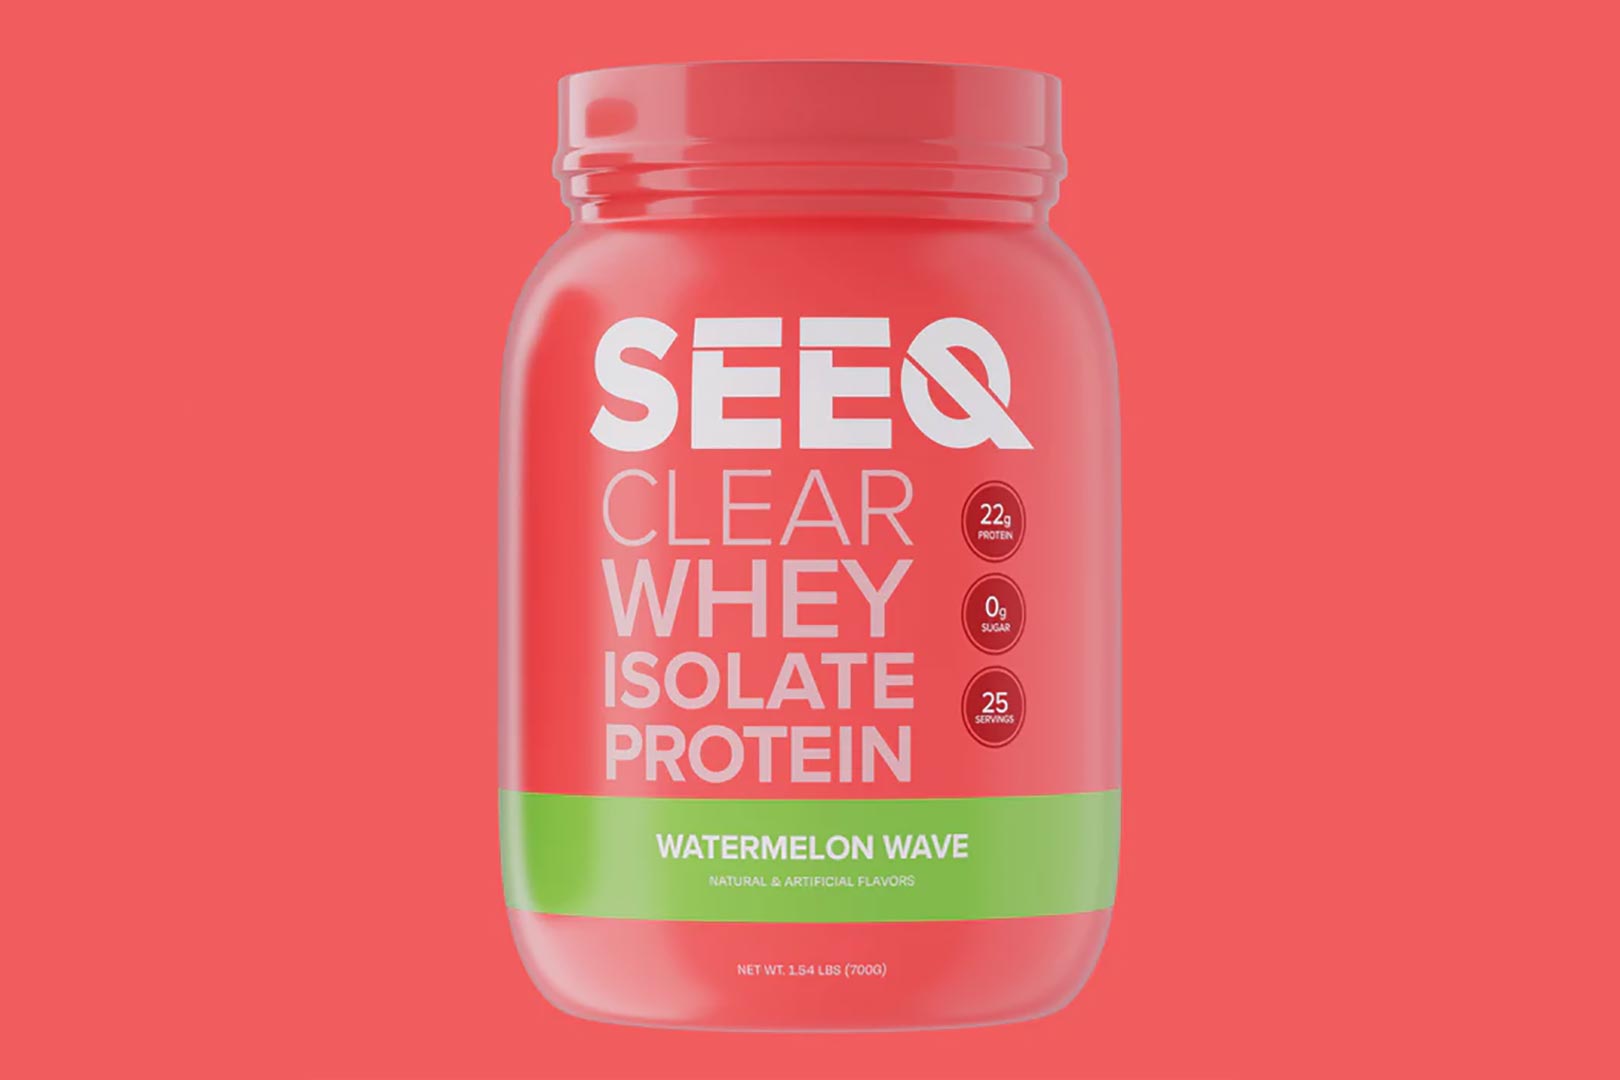 Seeq Watermelon Wave Clear Whey Isolate